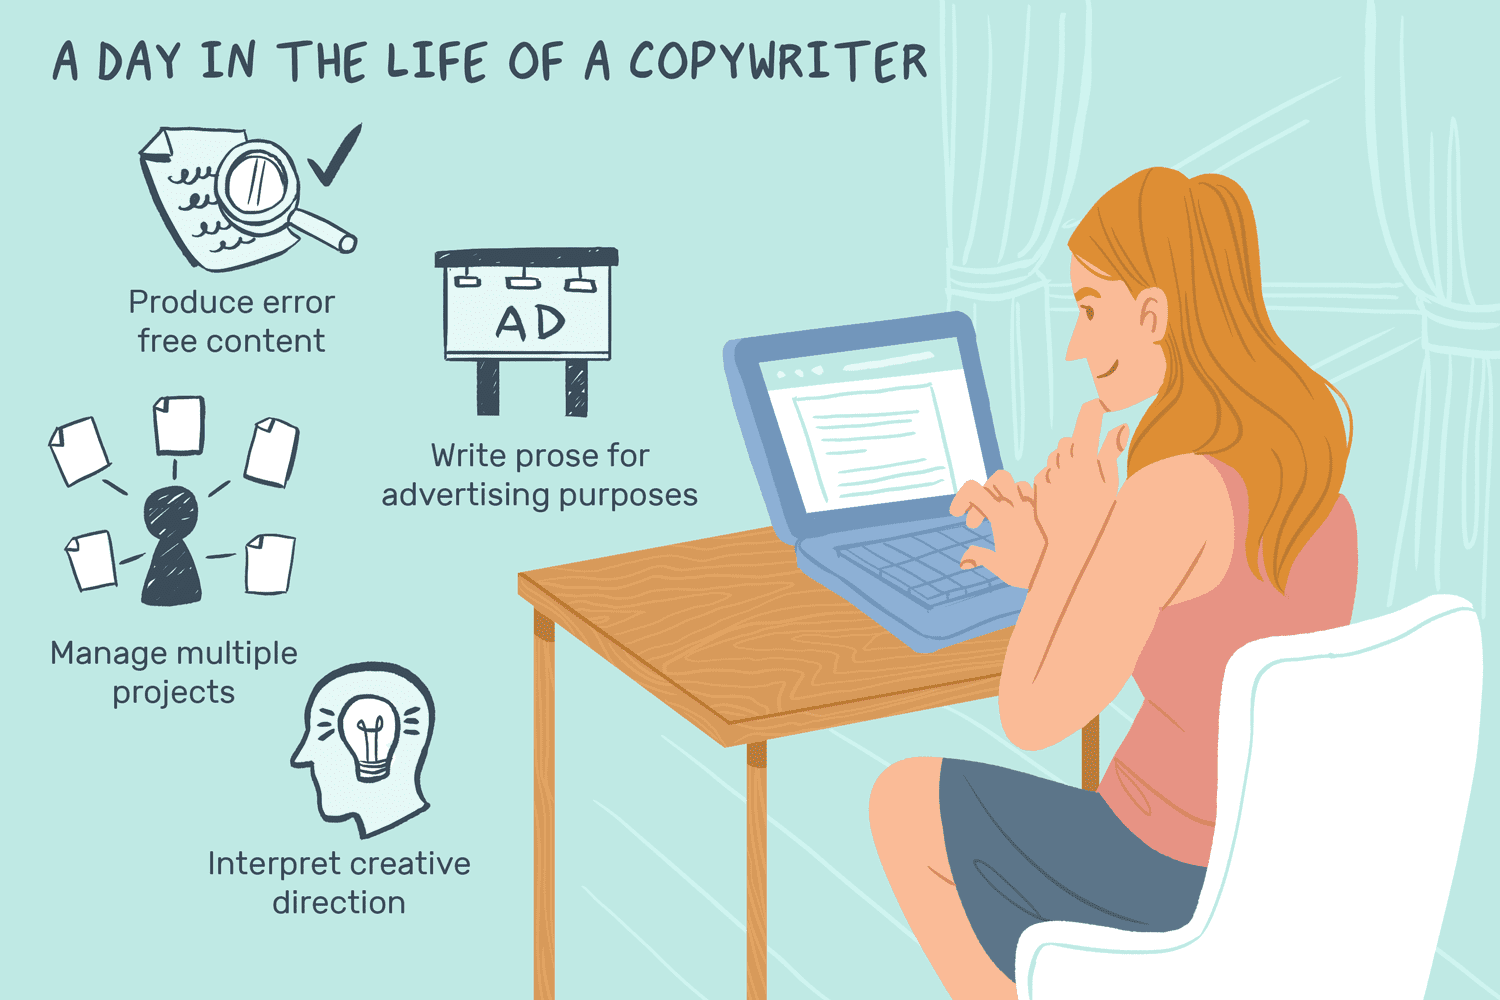 Copywriting jobs require you to do these things every day